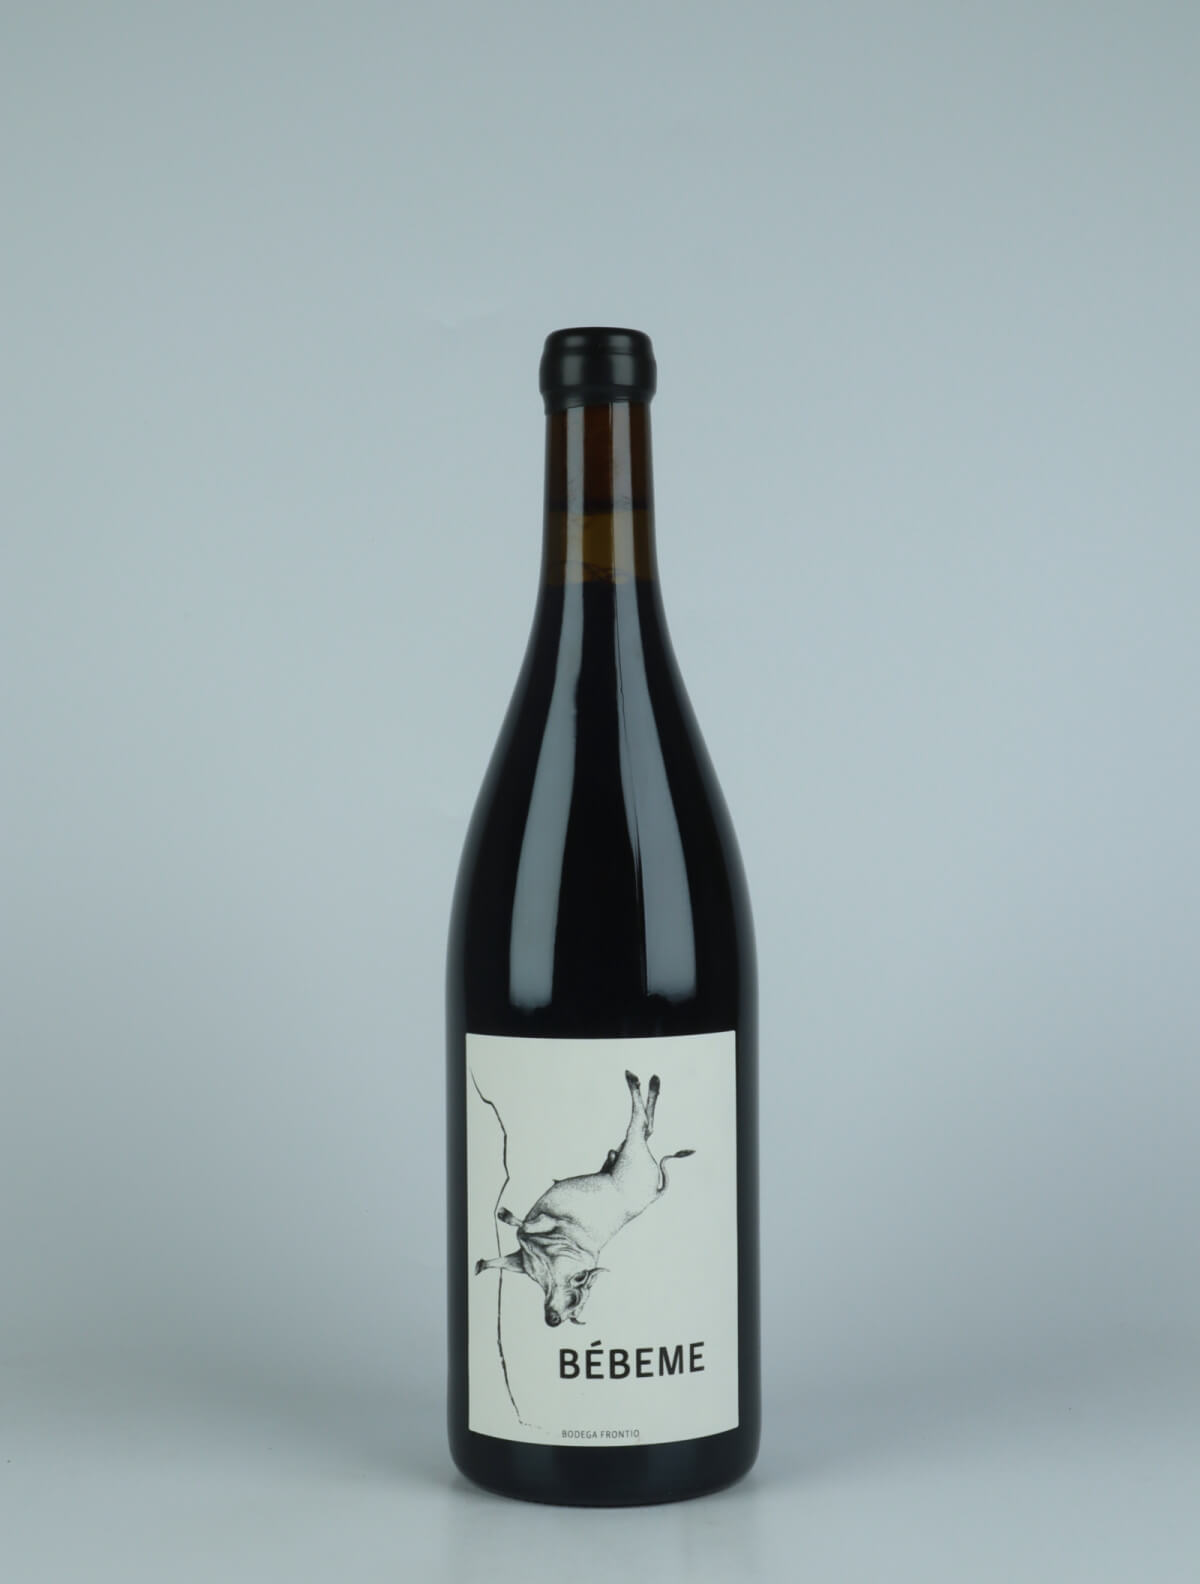 A bottle 2021 Bèbeme Red wine from Bodega Frontio, Arribes in Spain